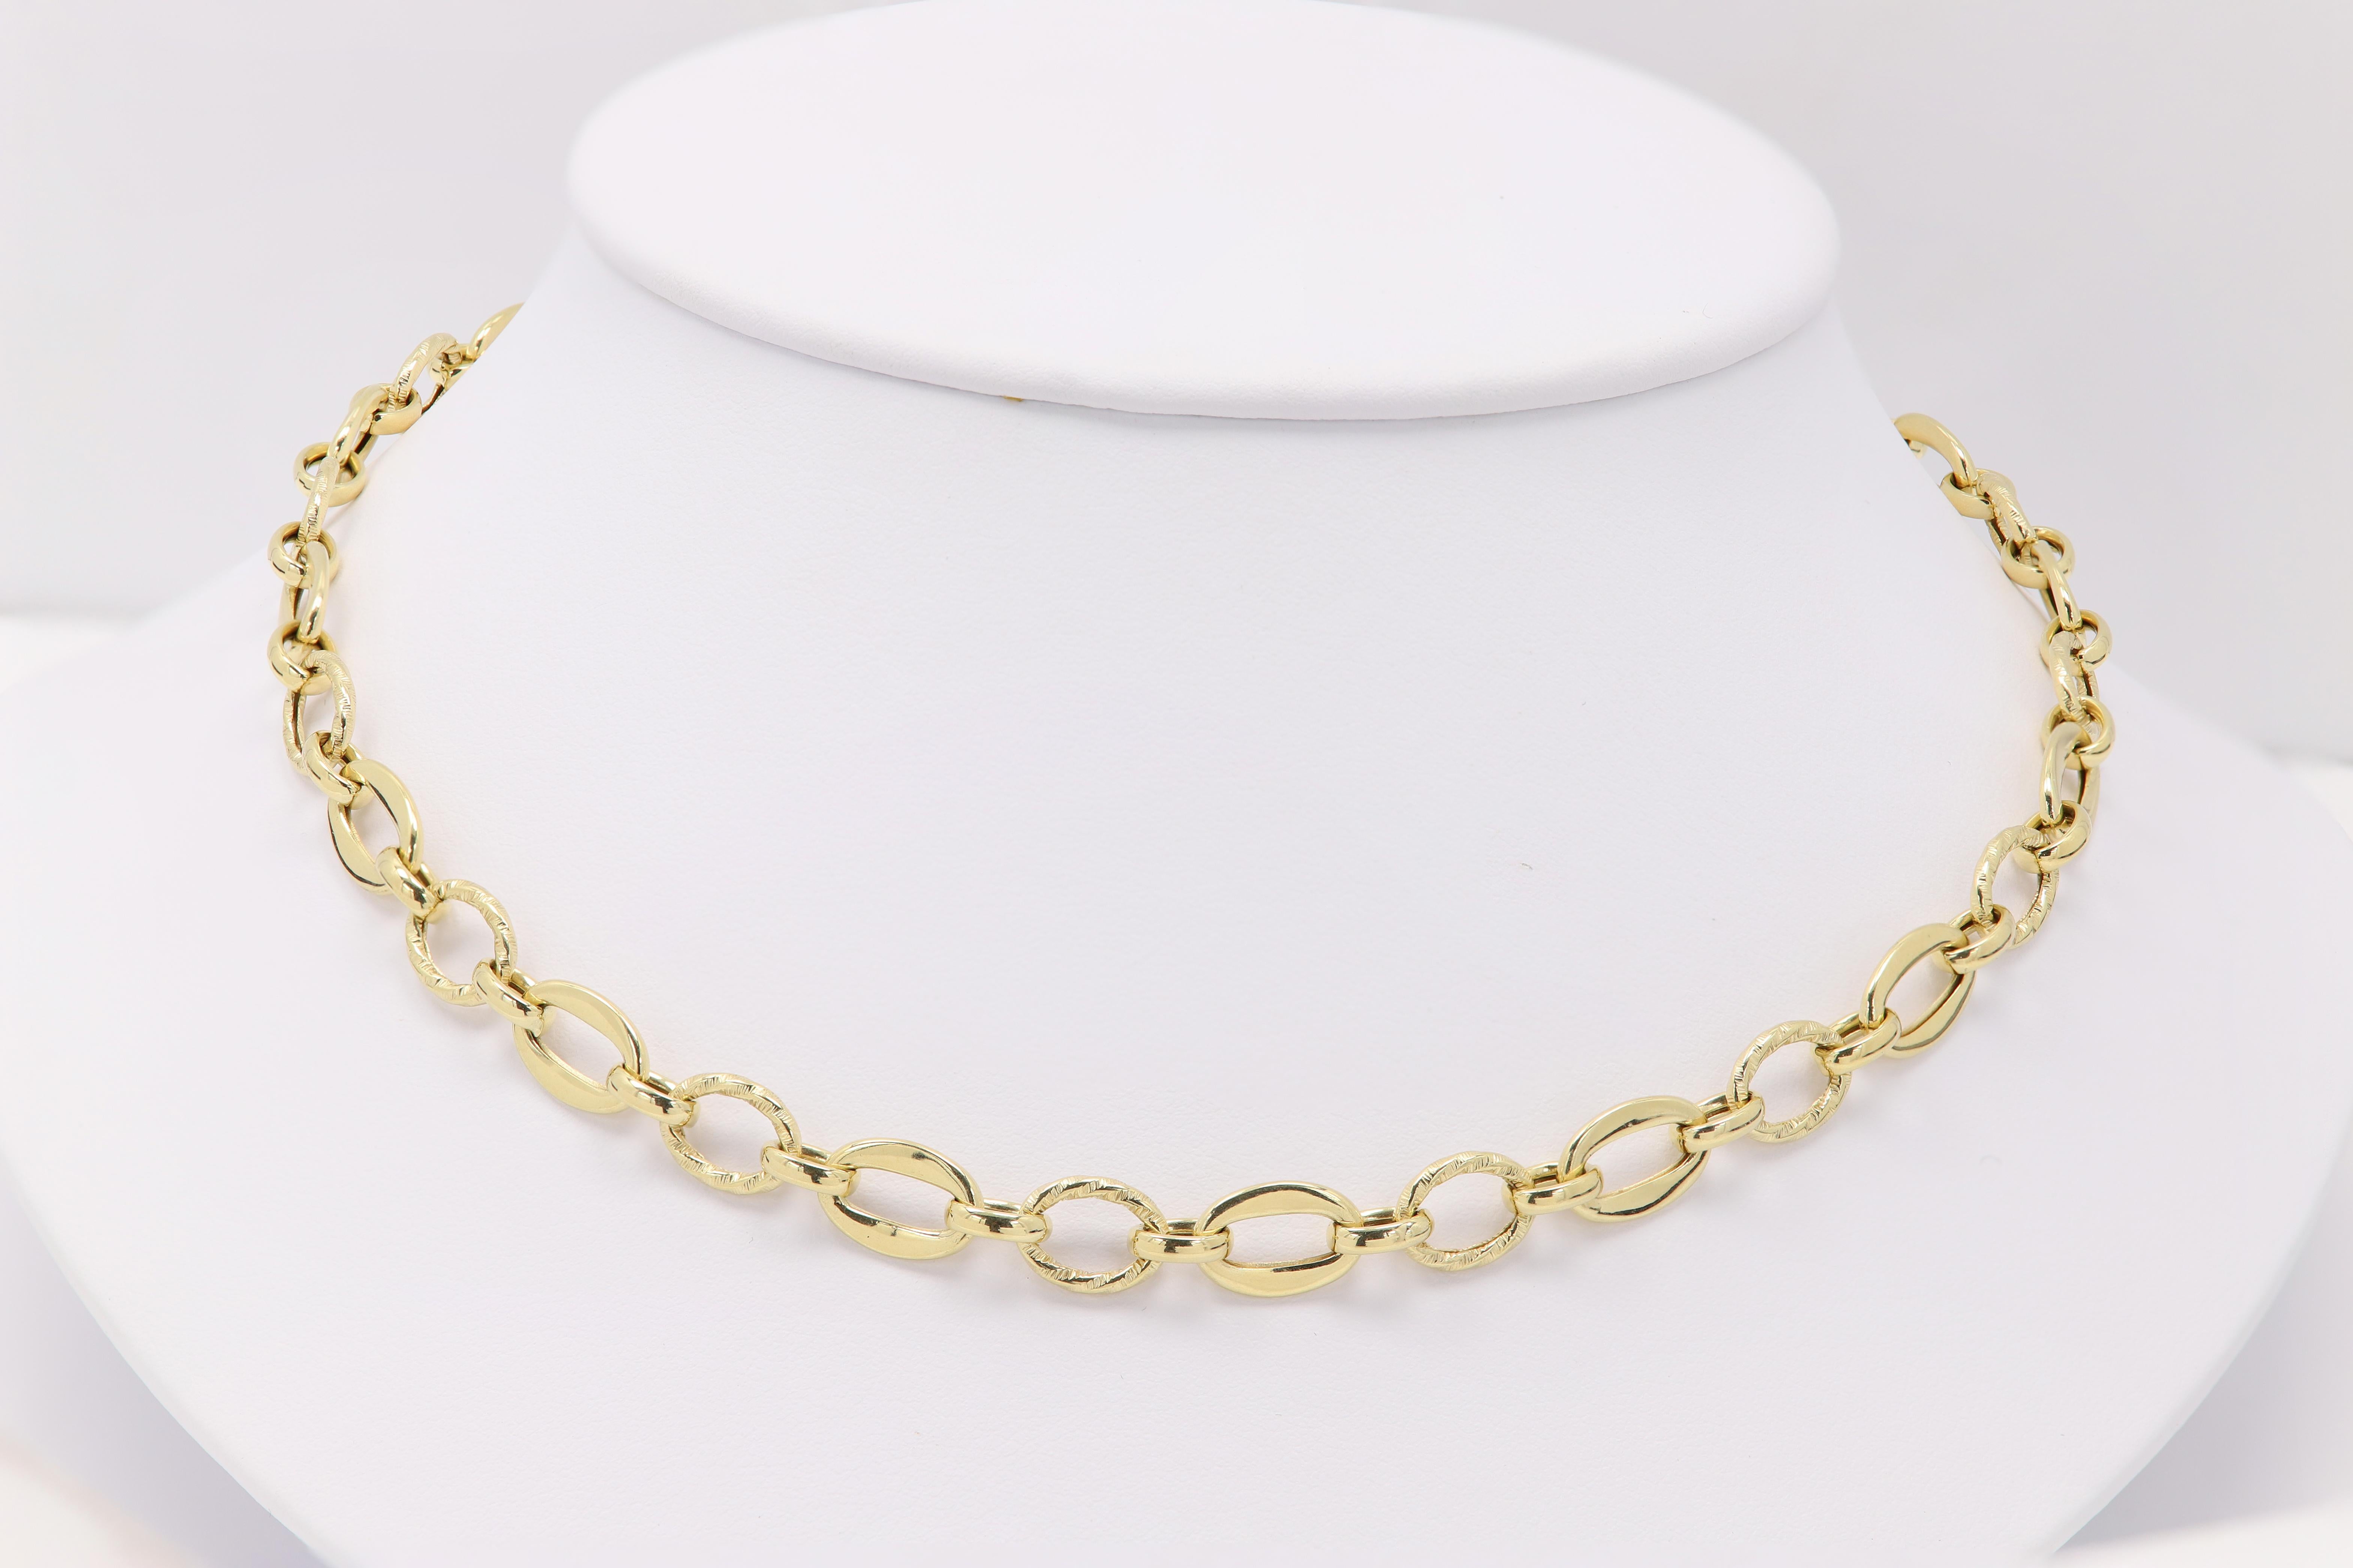 Italian Creative Link Chain set Necklace and Bracelet 14 Karat Yellow Gold Links For Sale 4